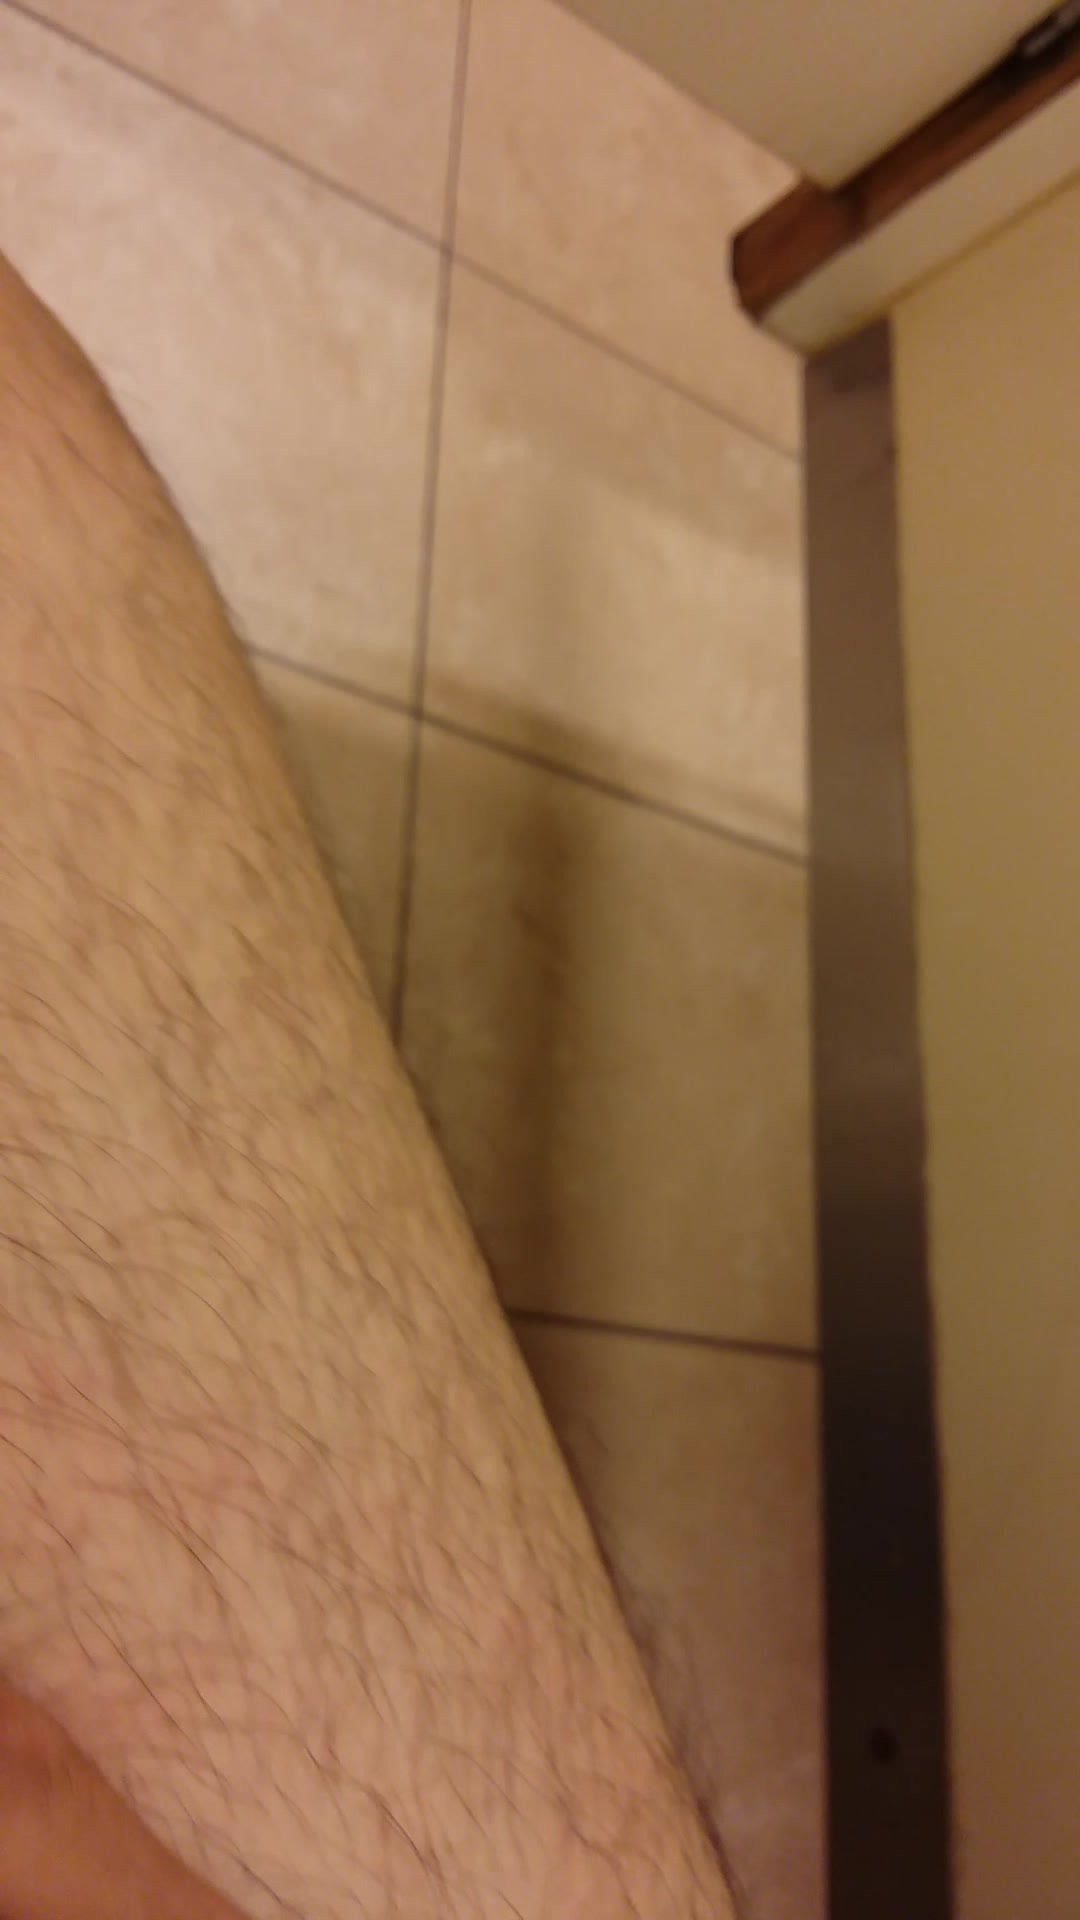 shitting in the next stall II